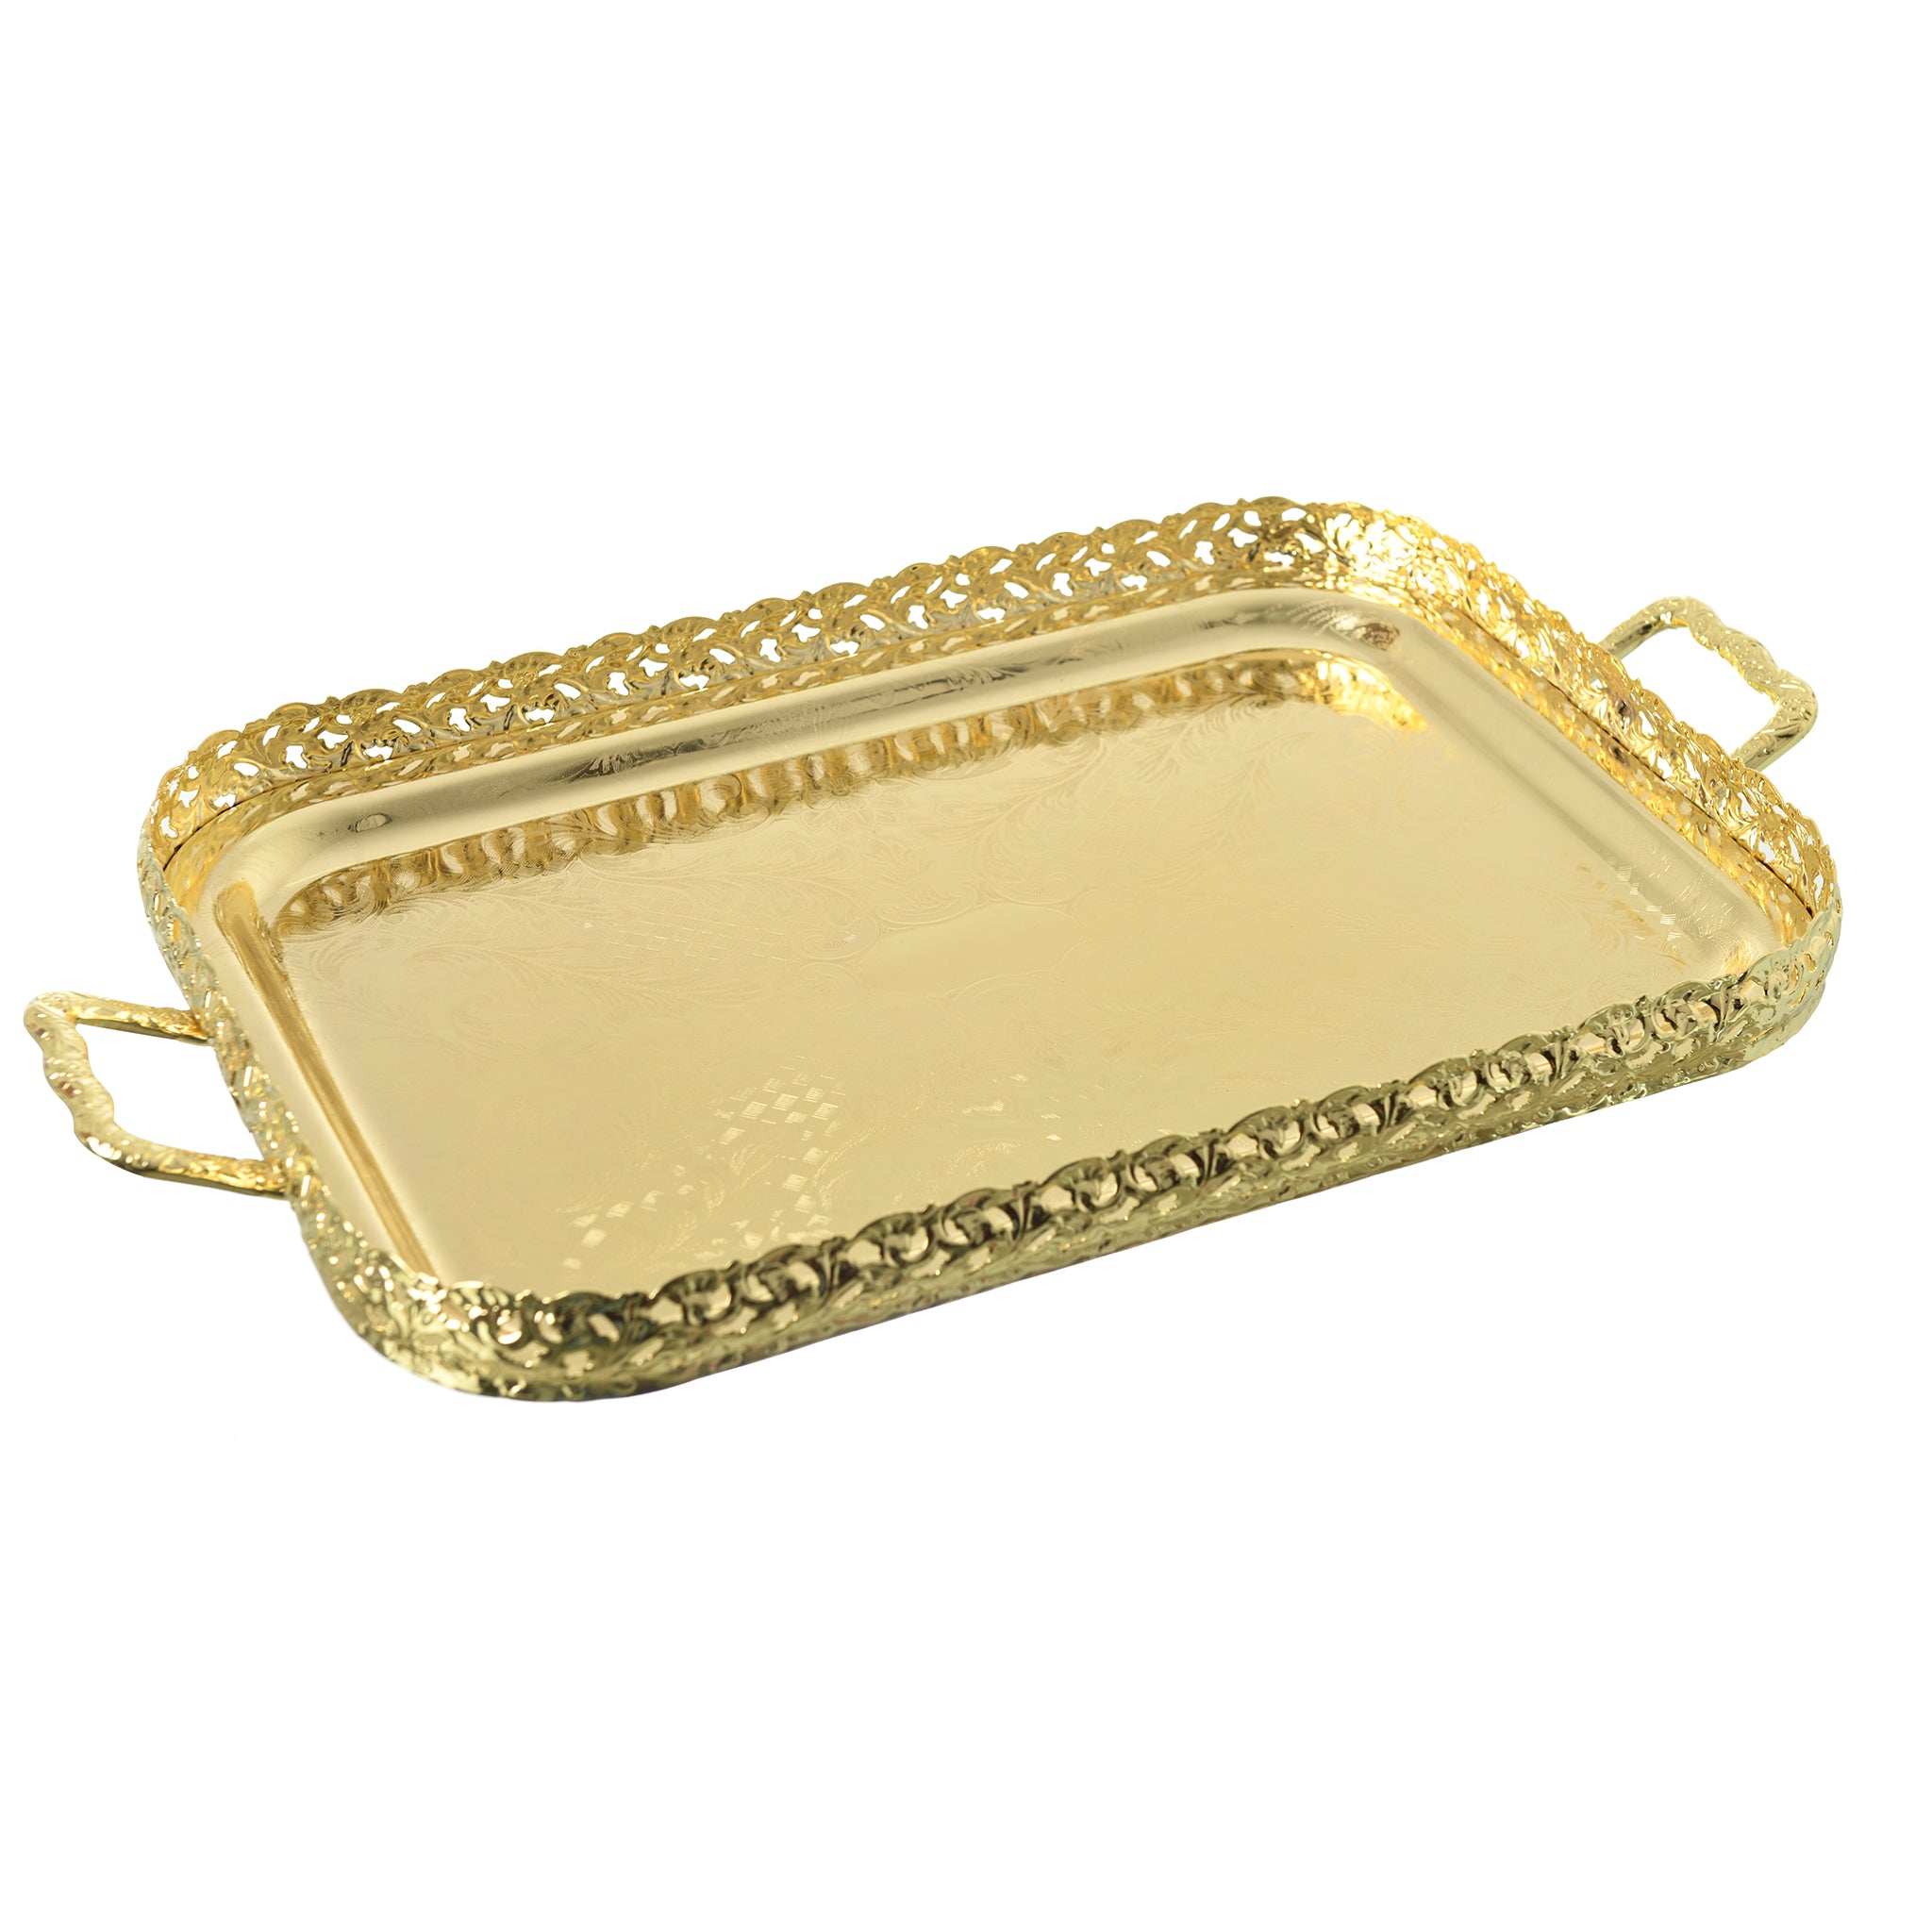 Queen Anne - Rectangular Tray with Handles - Gold - Gold Plated Metal - 51.5x29cm - 26000514